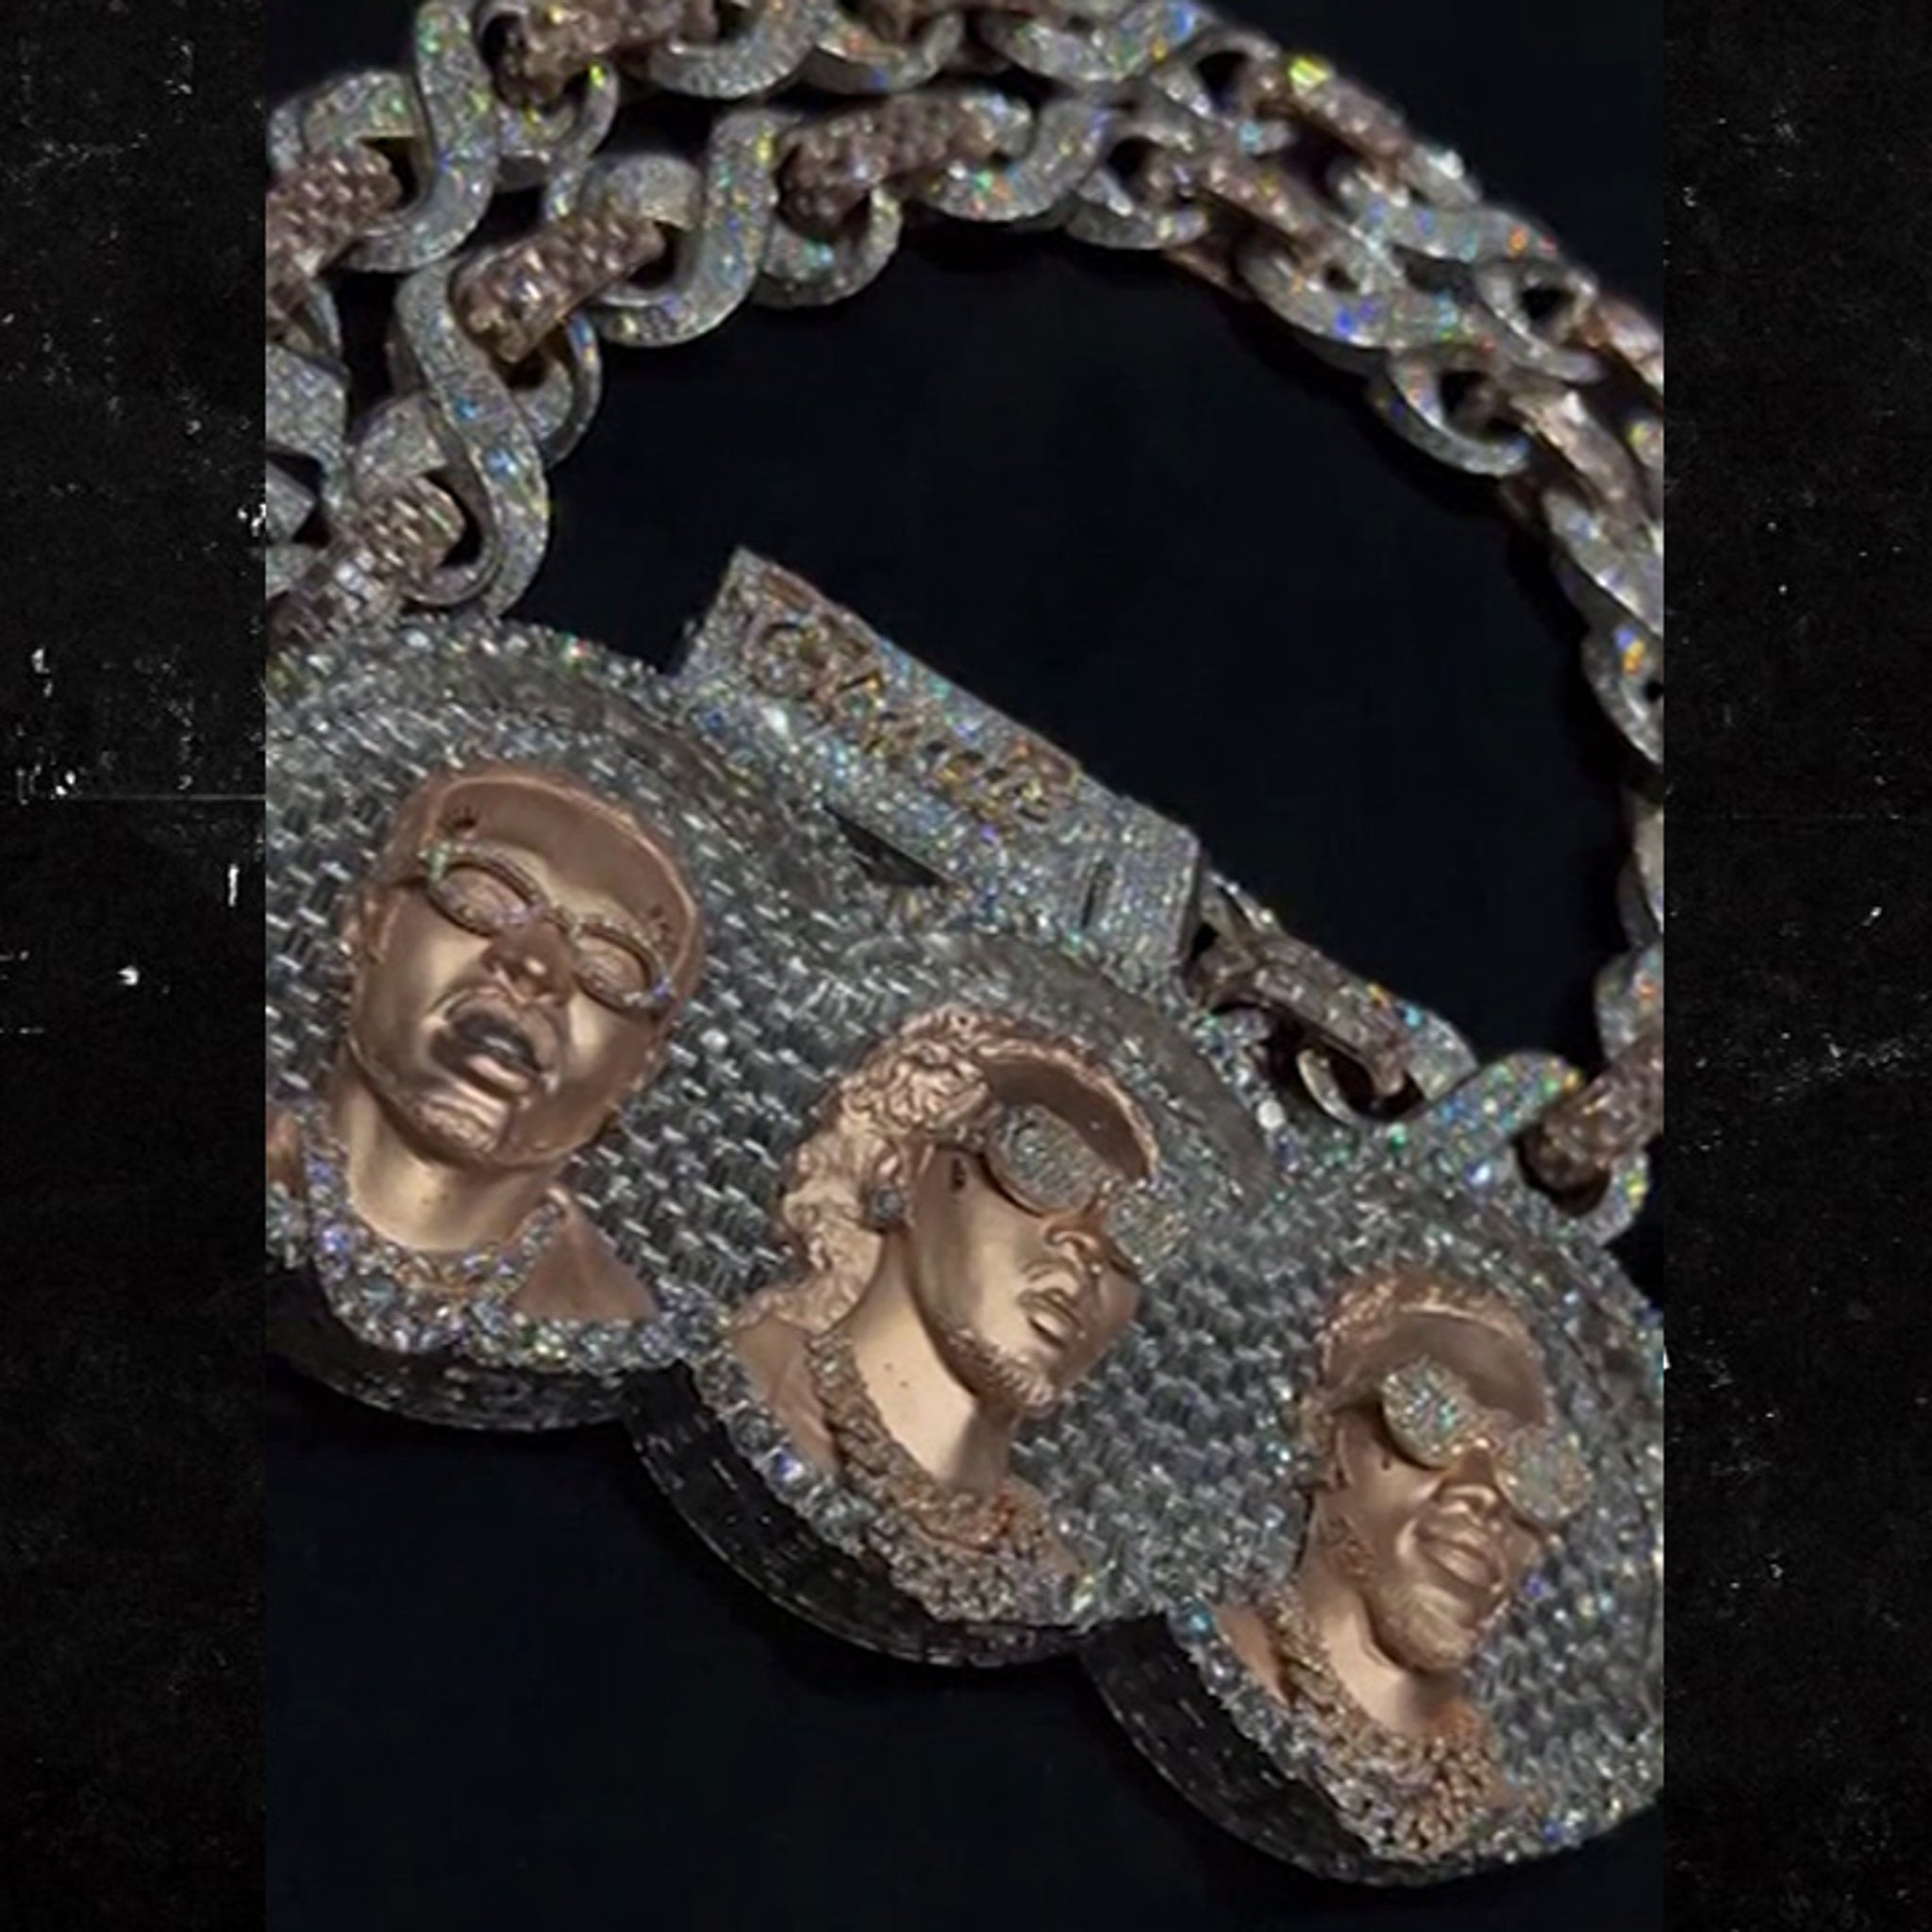 Migos Are Selling Replicas Of Their Tour Outfits As Halloween Costumes